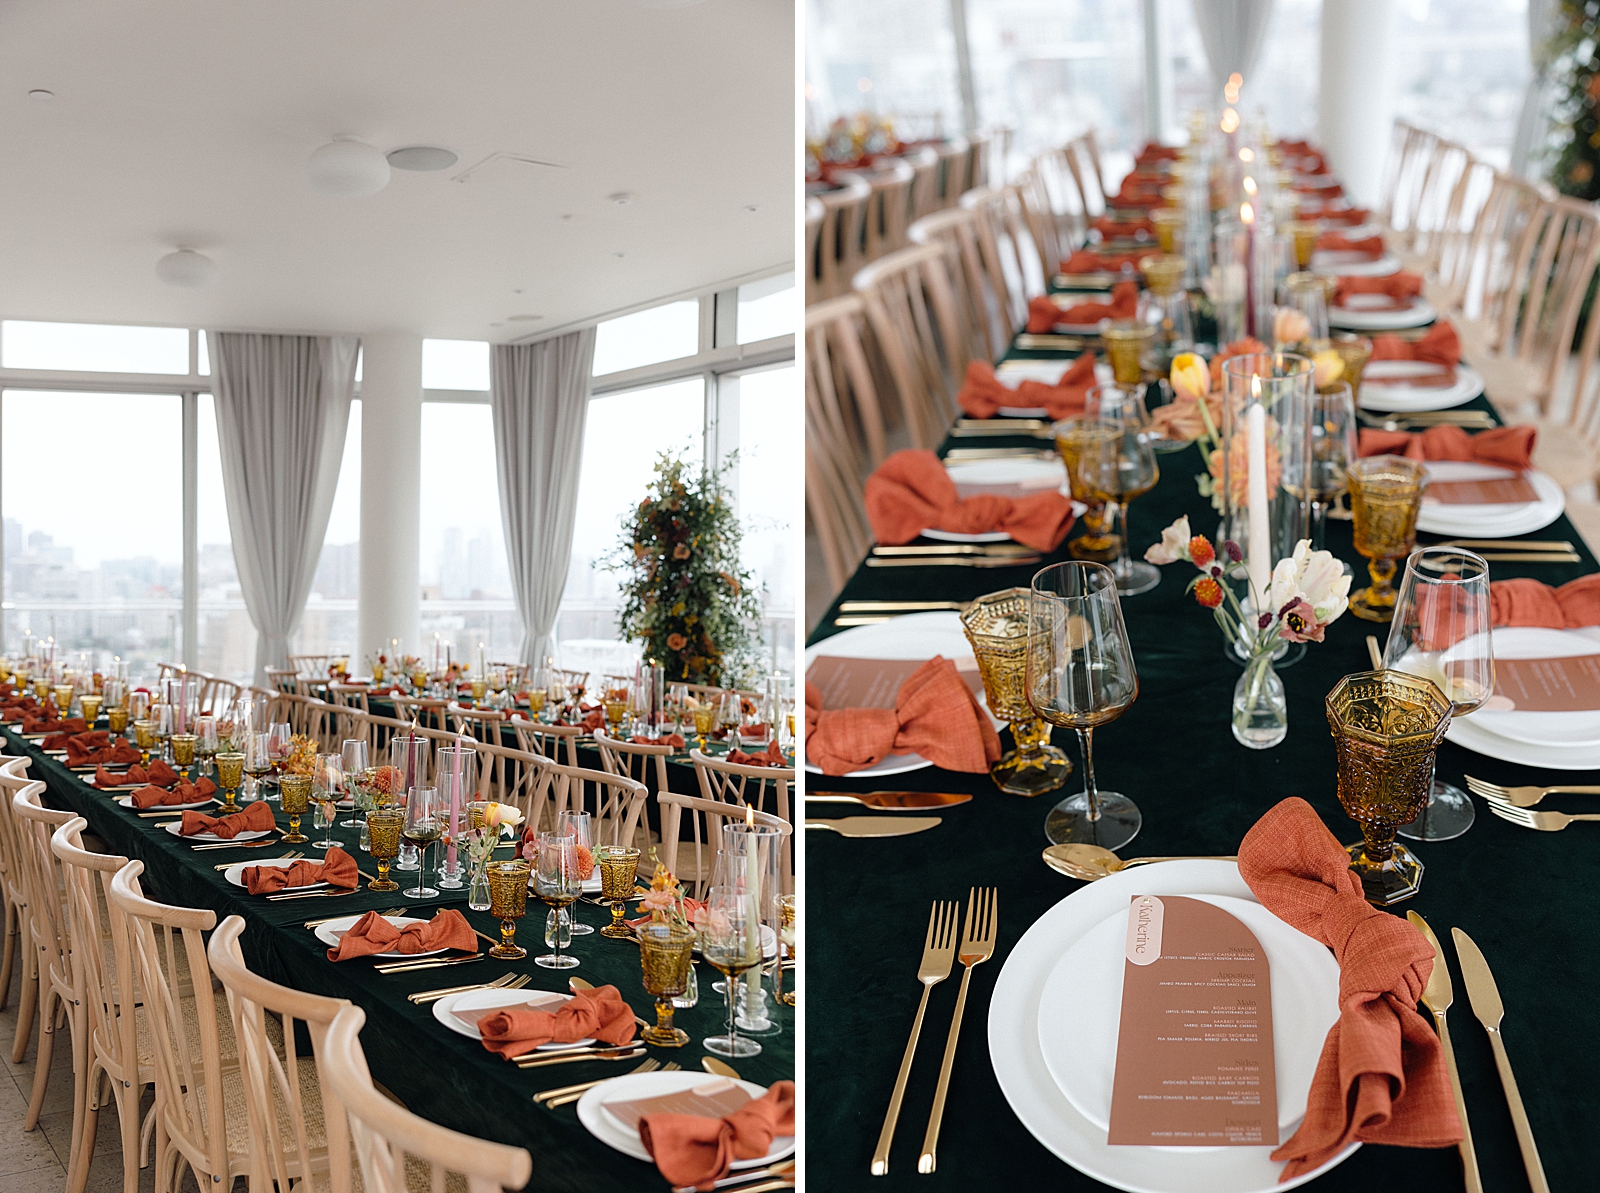 Left photo: Shot of the reception tables decked out in classic fall tones. 
Right photo: Close up shot of some of the place settings on one of the reception tables.